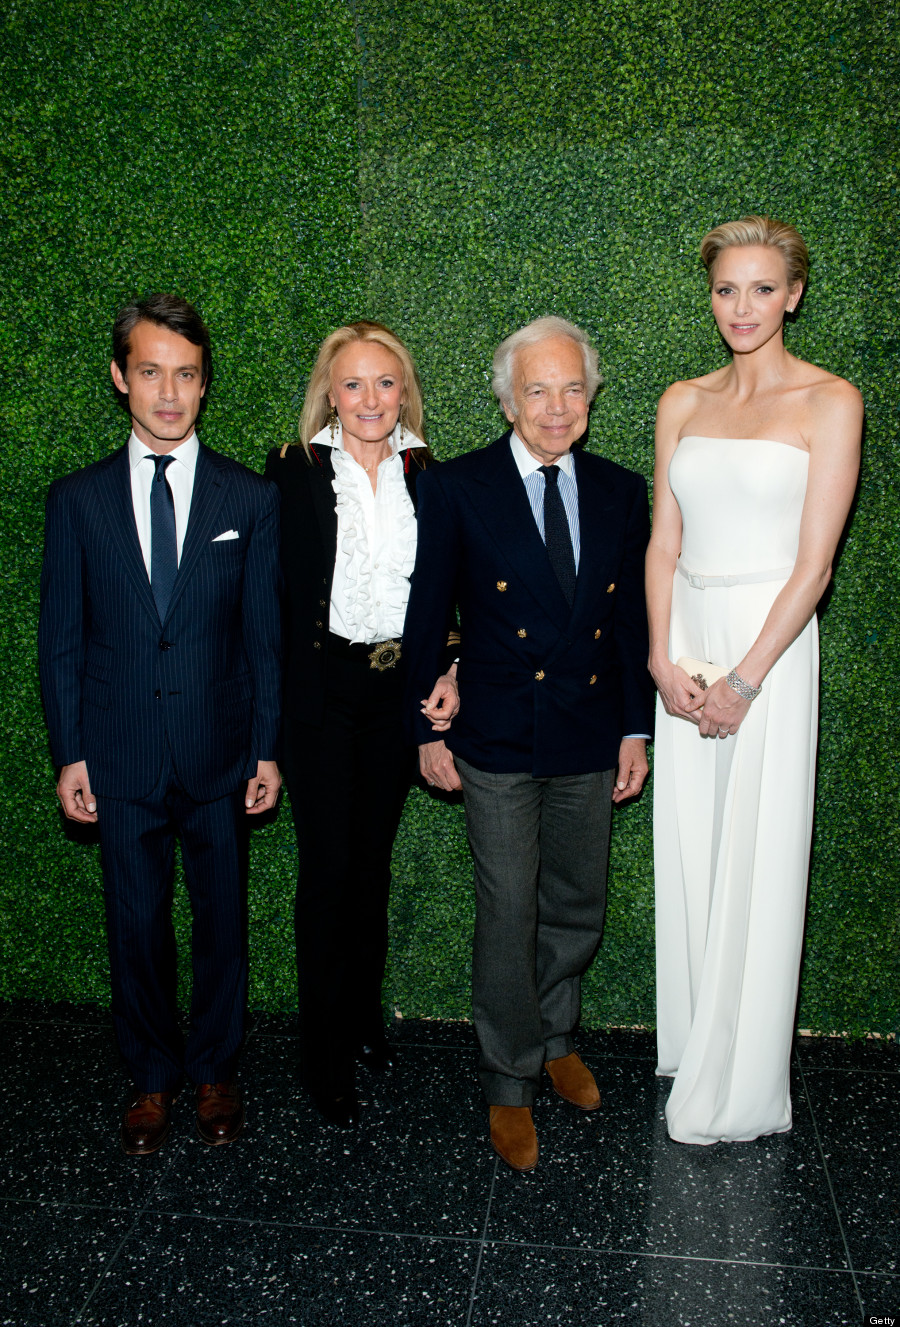 Princess Charlene Of Monaco Looks Perfect In White Jumpsuit | HuffPost ...